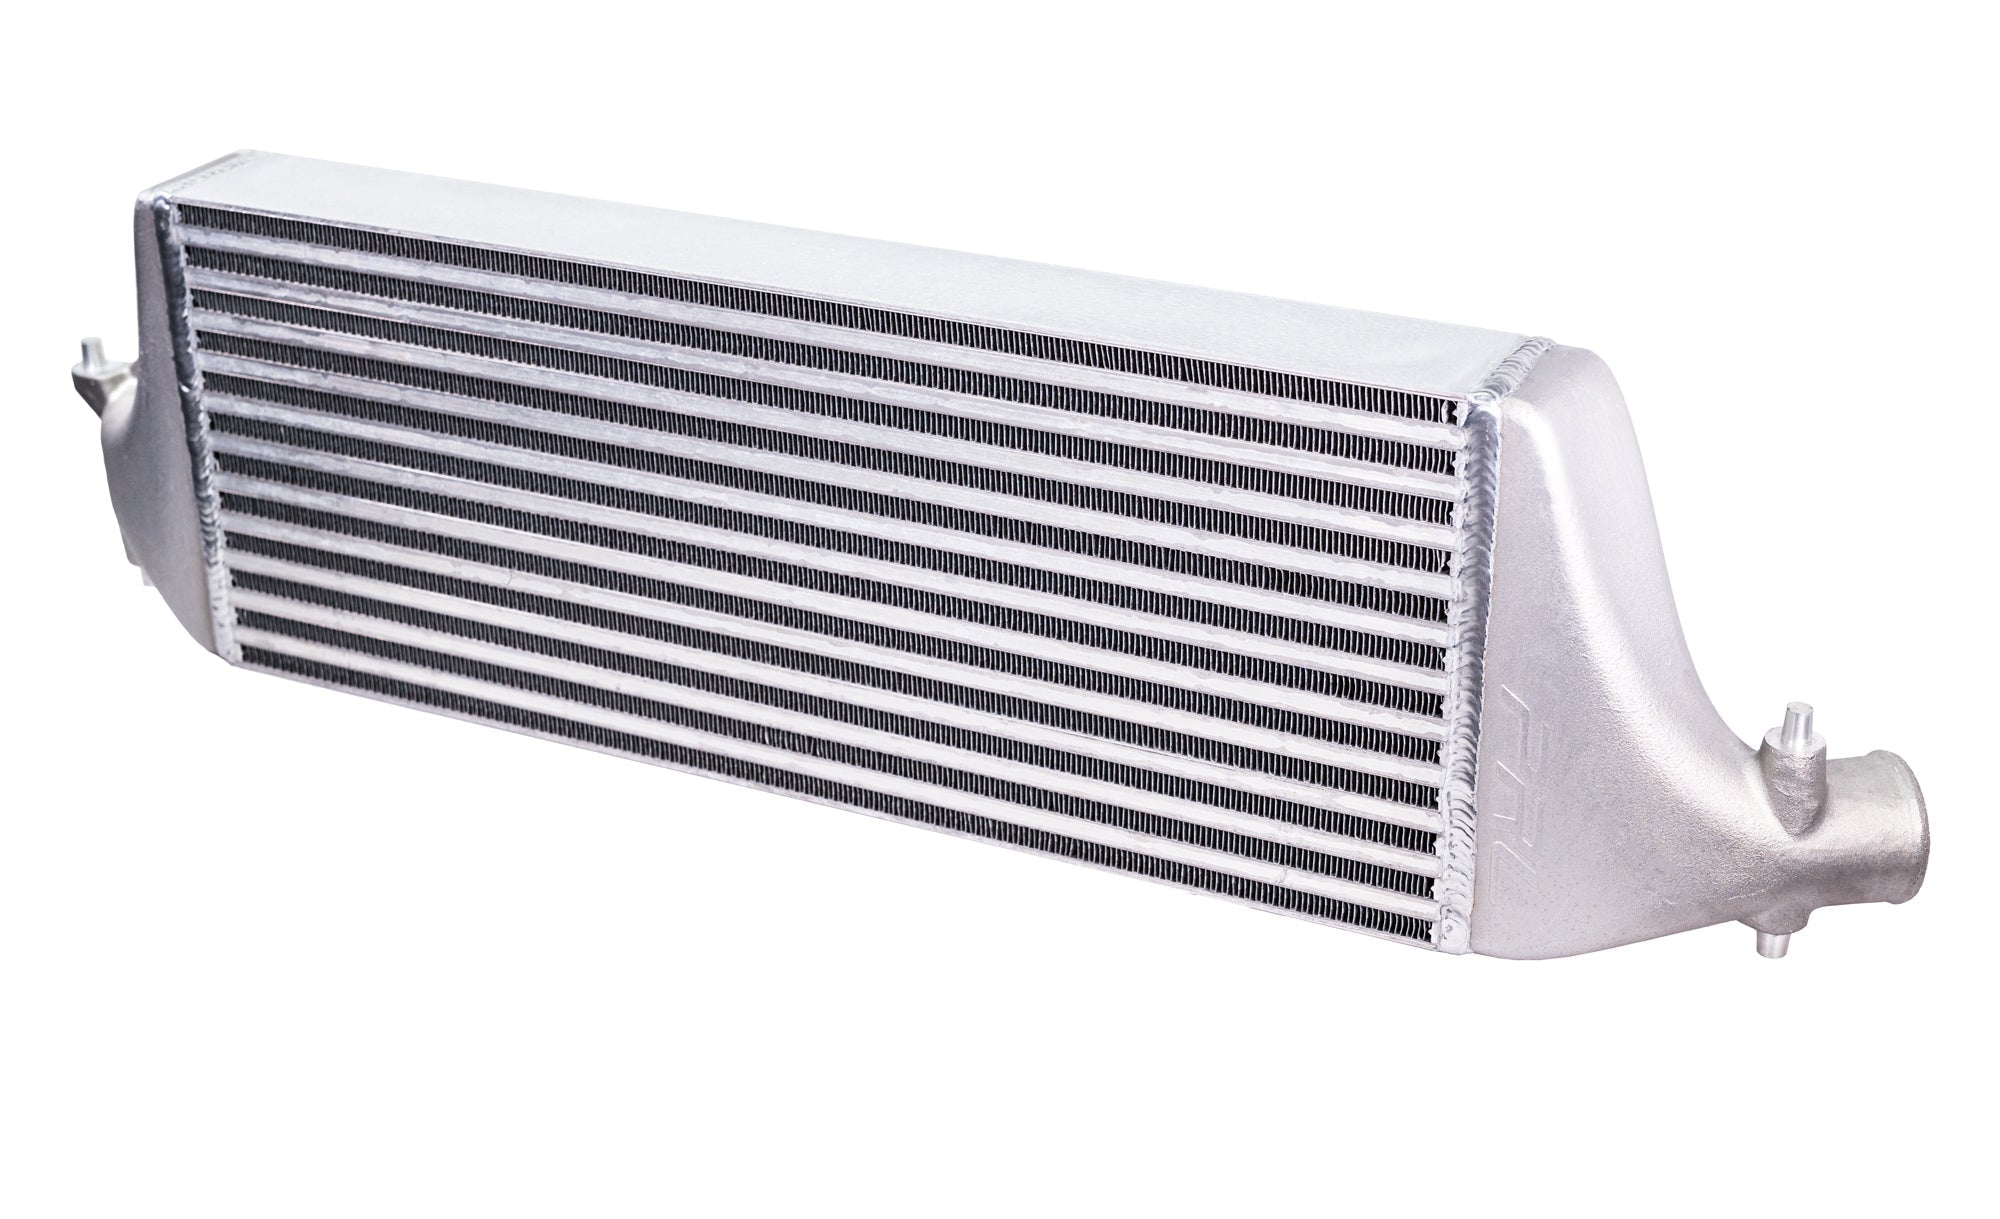 New Product Launch - 2019+ Acura RDX 2.0T Intercooler Upgrade